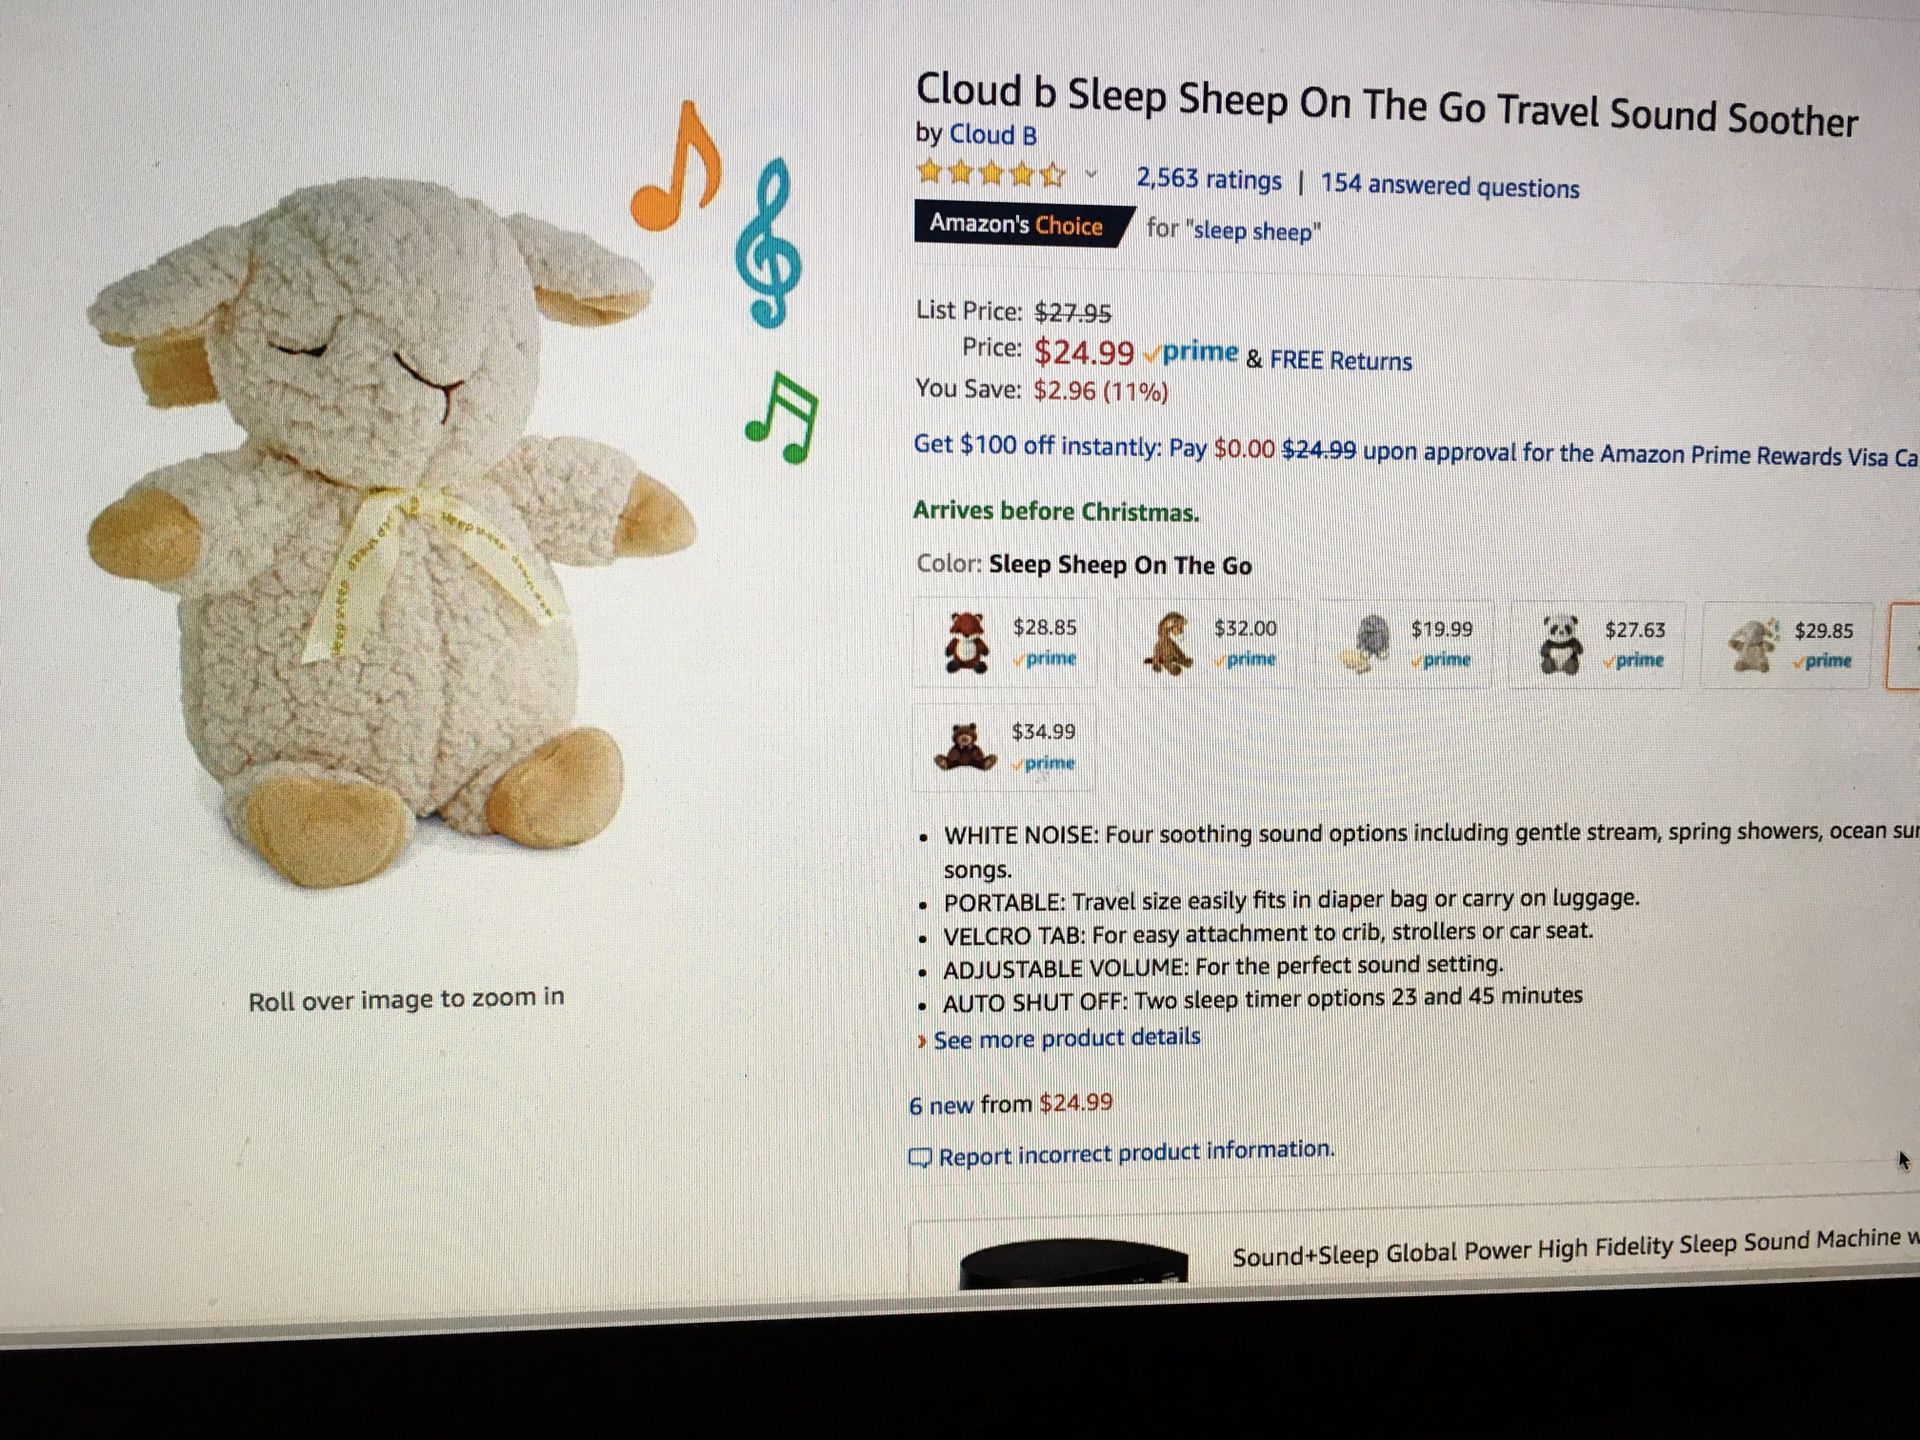 Cloud b Sleep on the go Travel Sound Soother